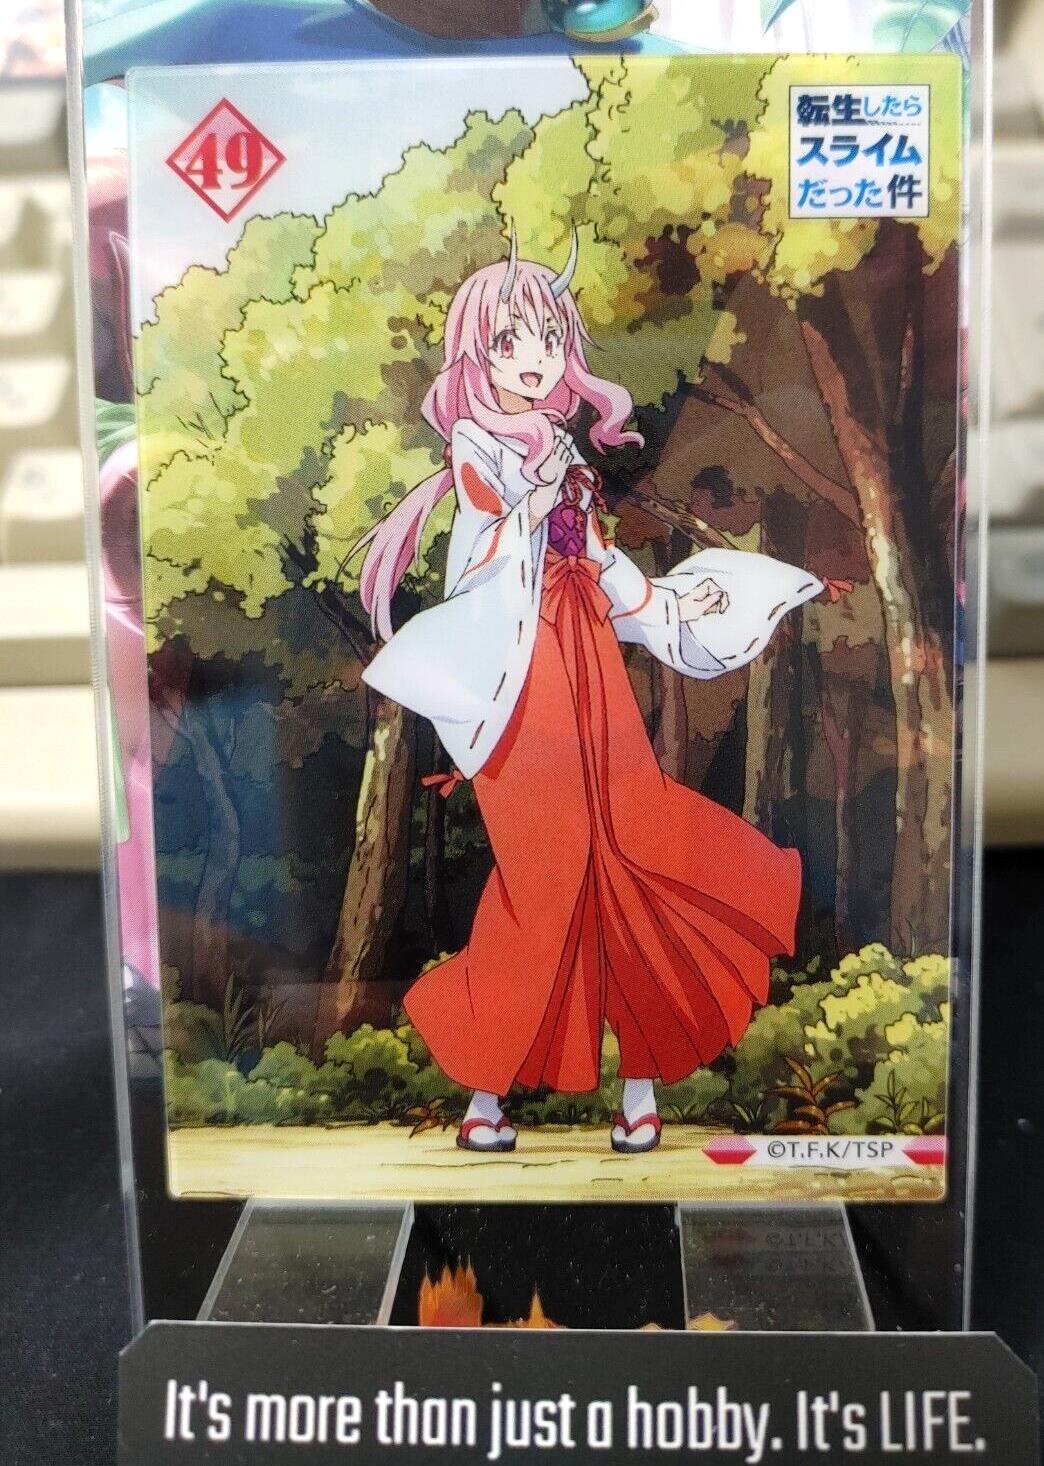 That Time I Got Reincarnated As A Slime Clear Card Collection Shuna No. 49 Japan